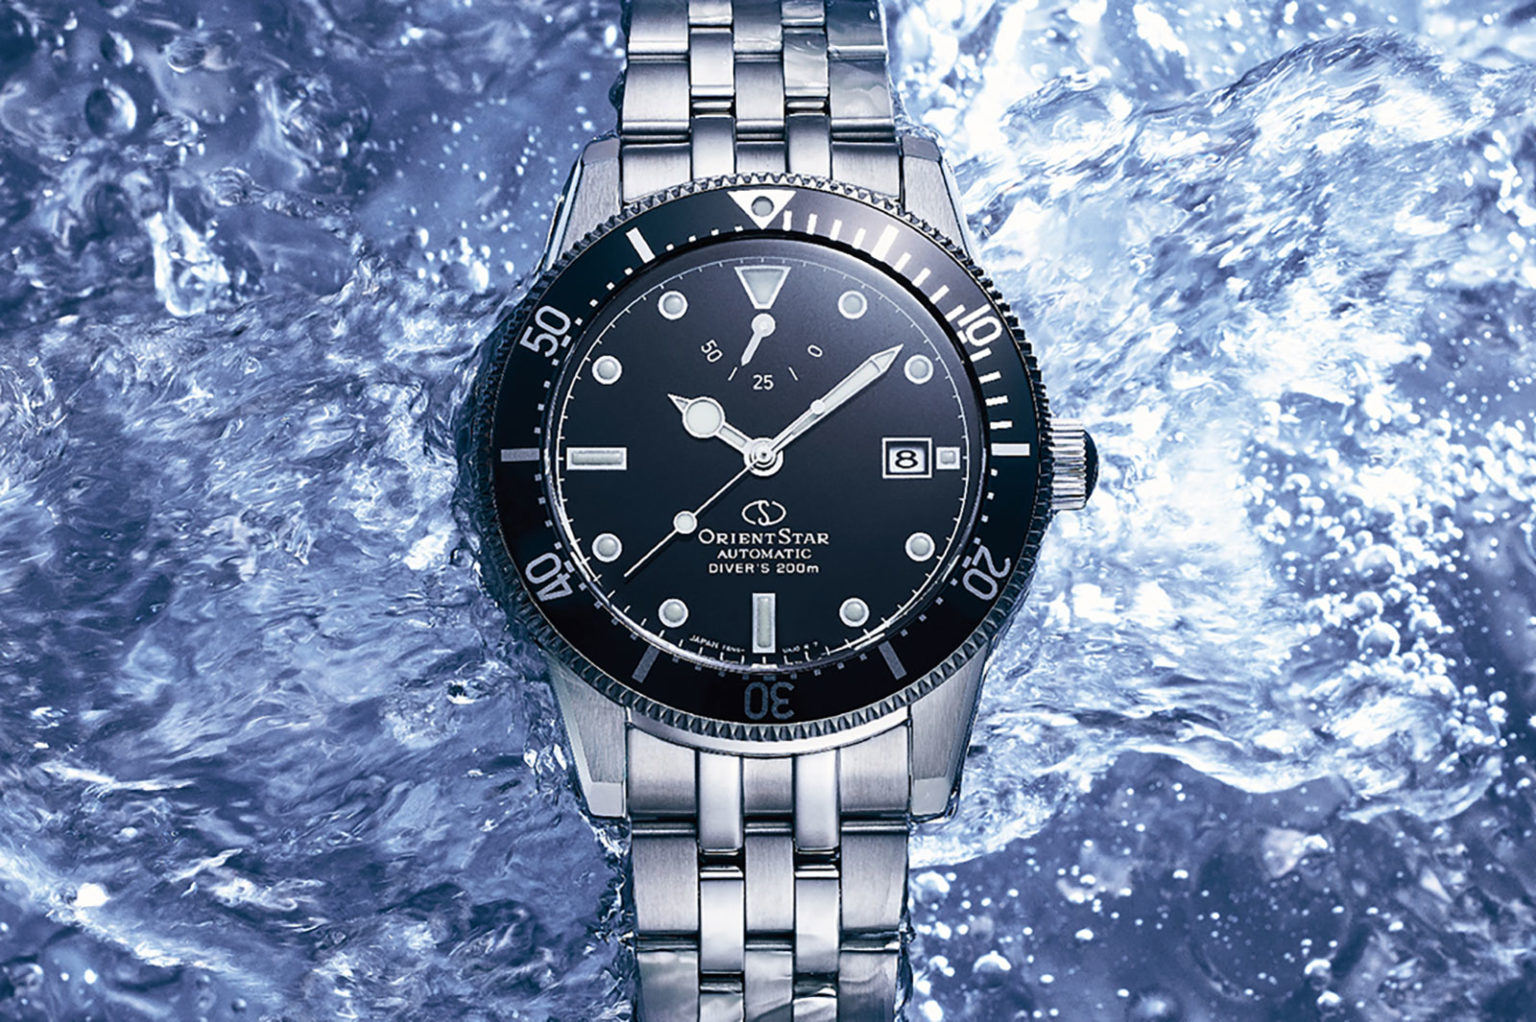 Orient Star Introduces the Diver 1964 2nd Edition ⋅ FALSE.TWINS